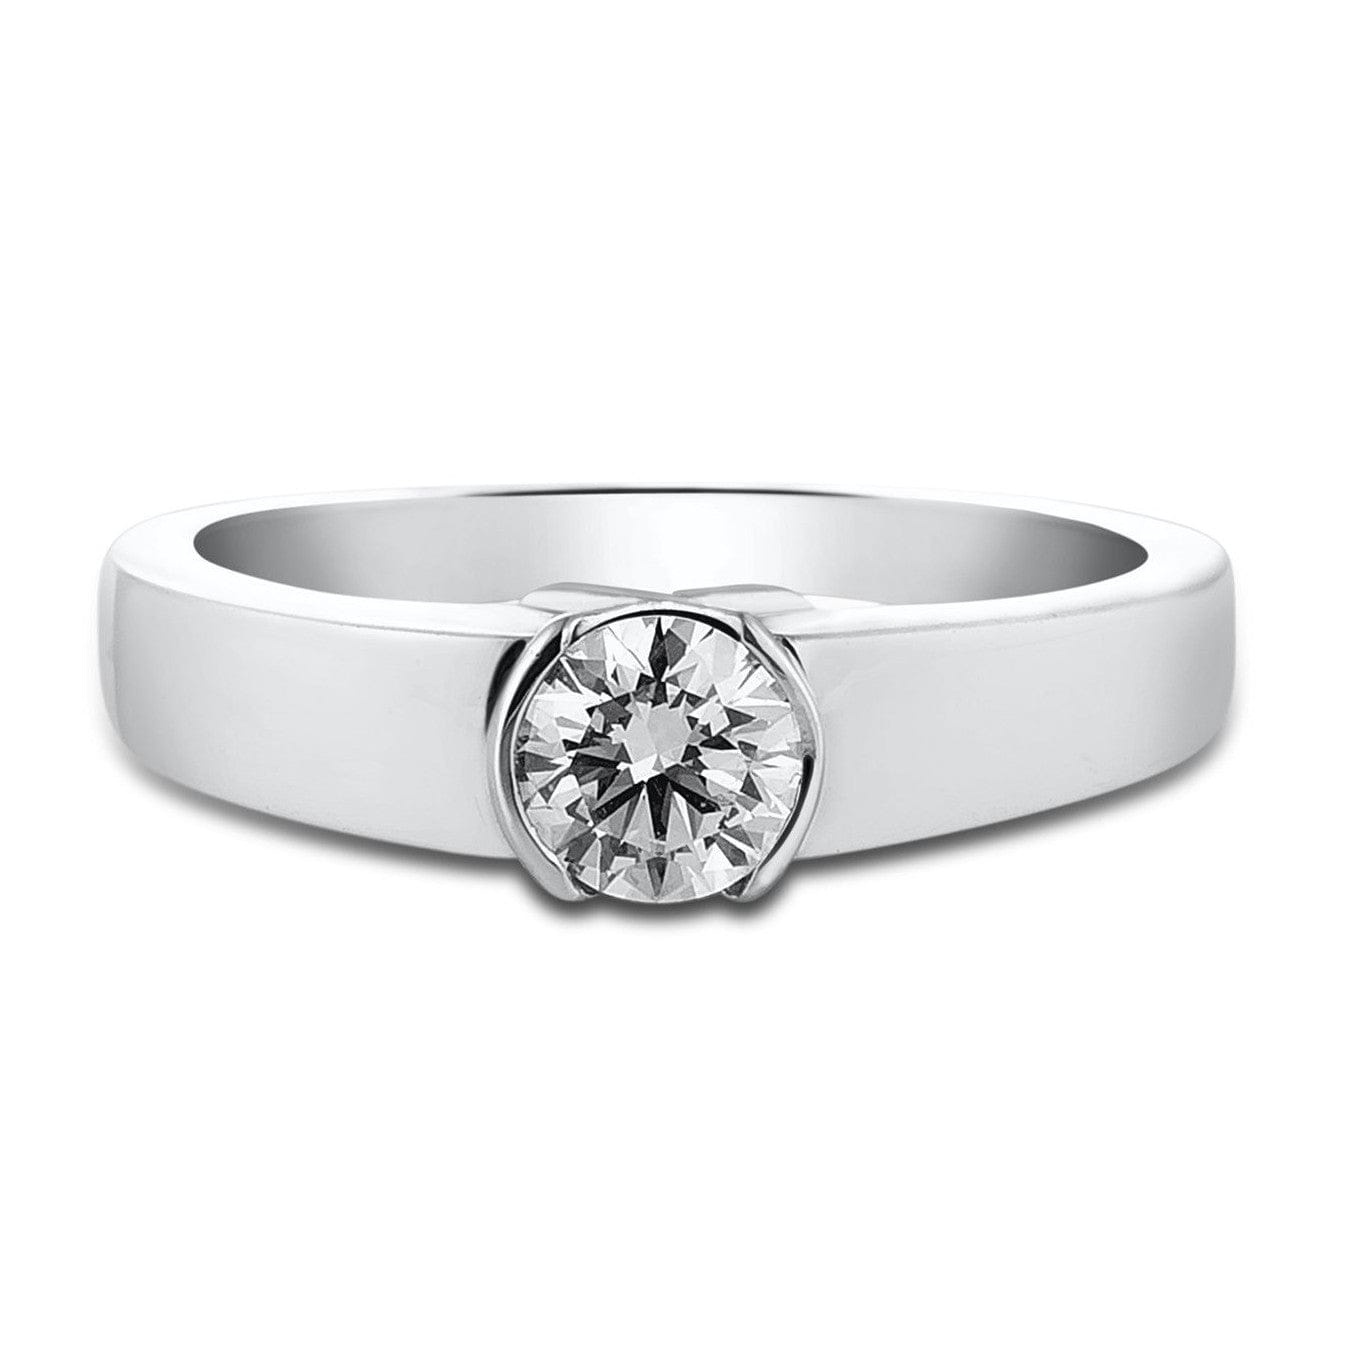 10 Best Engagement Ring Settings and Styles